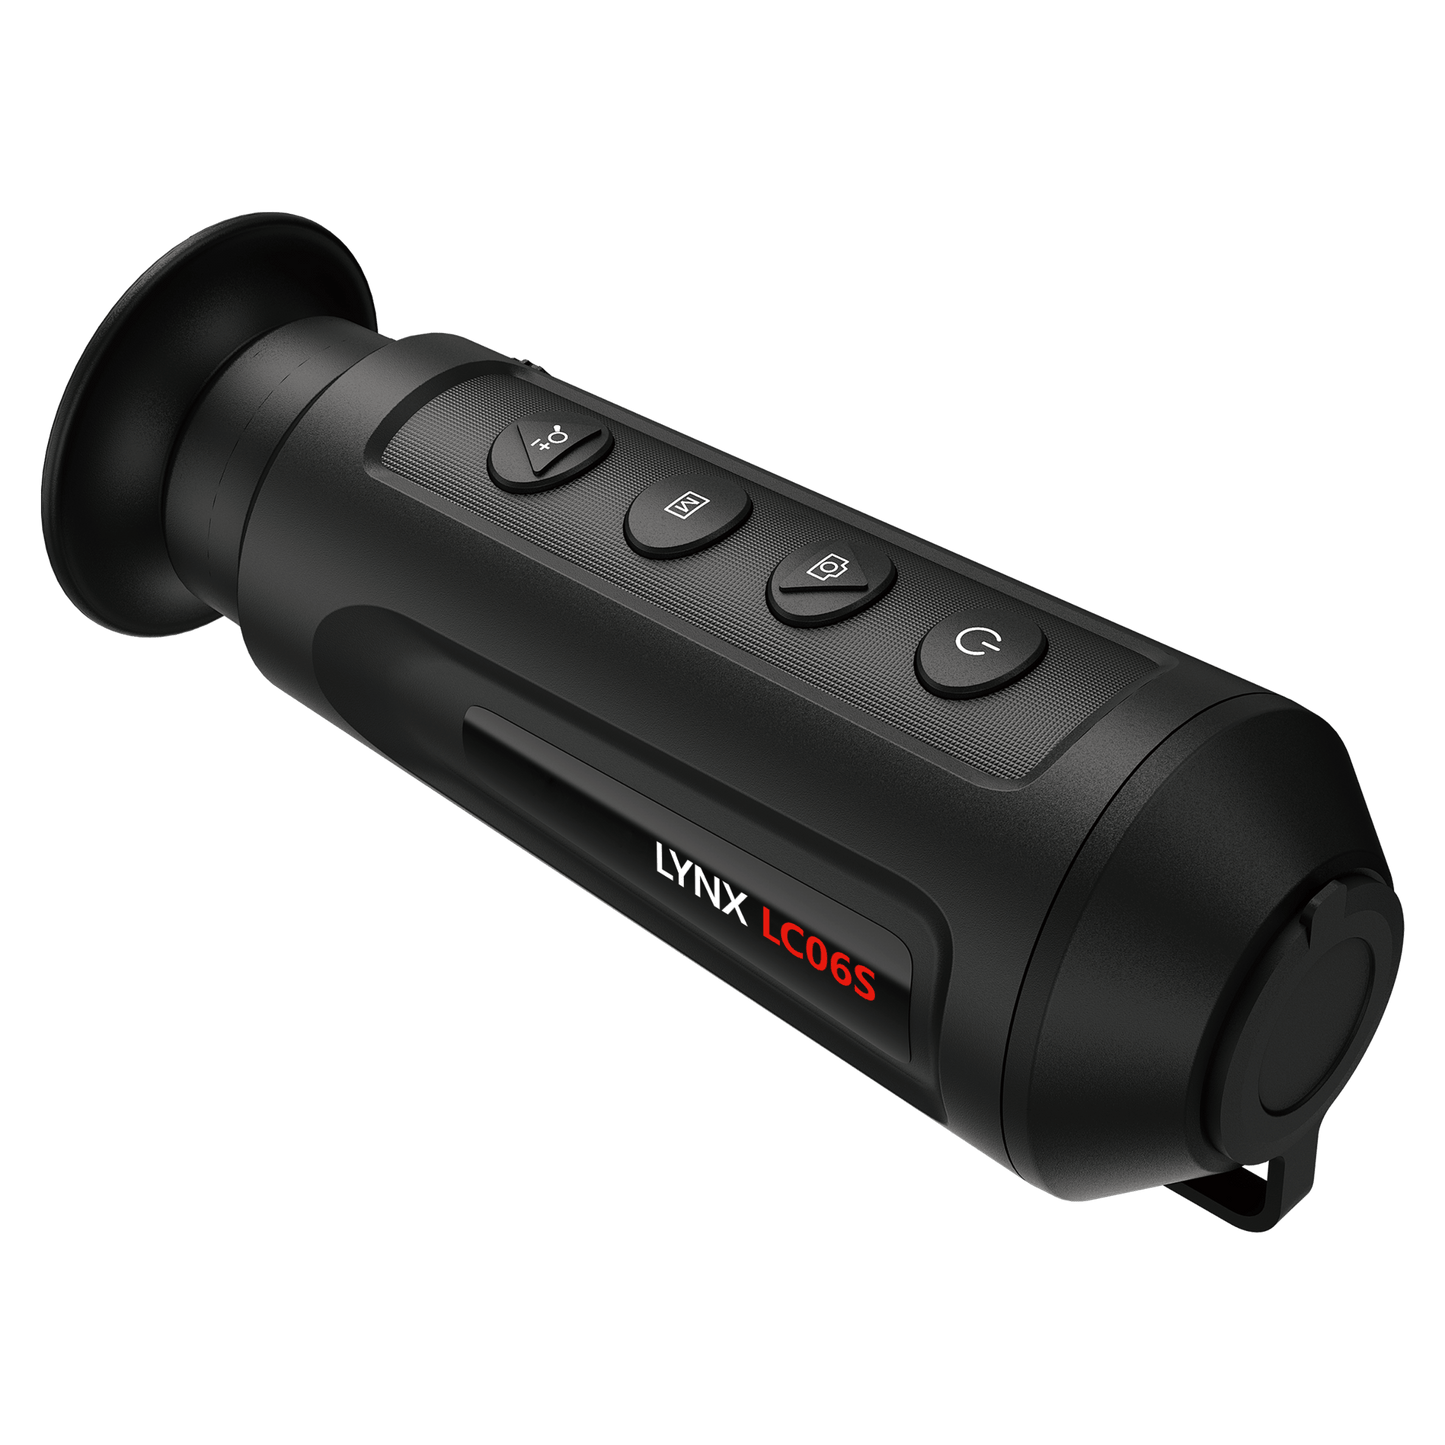 HikMicro Lynx LC06S thermal monocular image showing the front right view with the device name